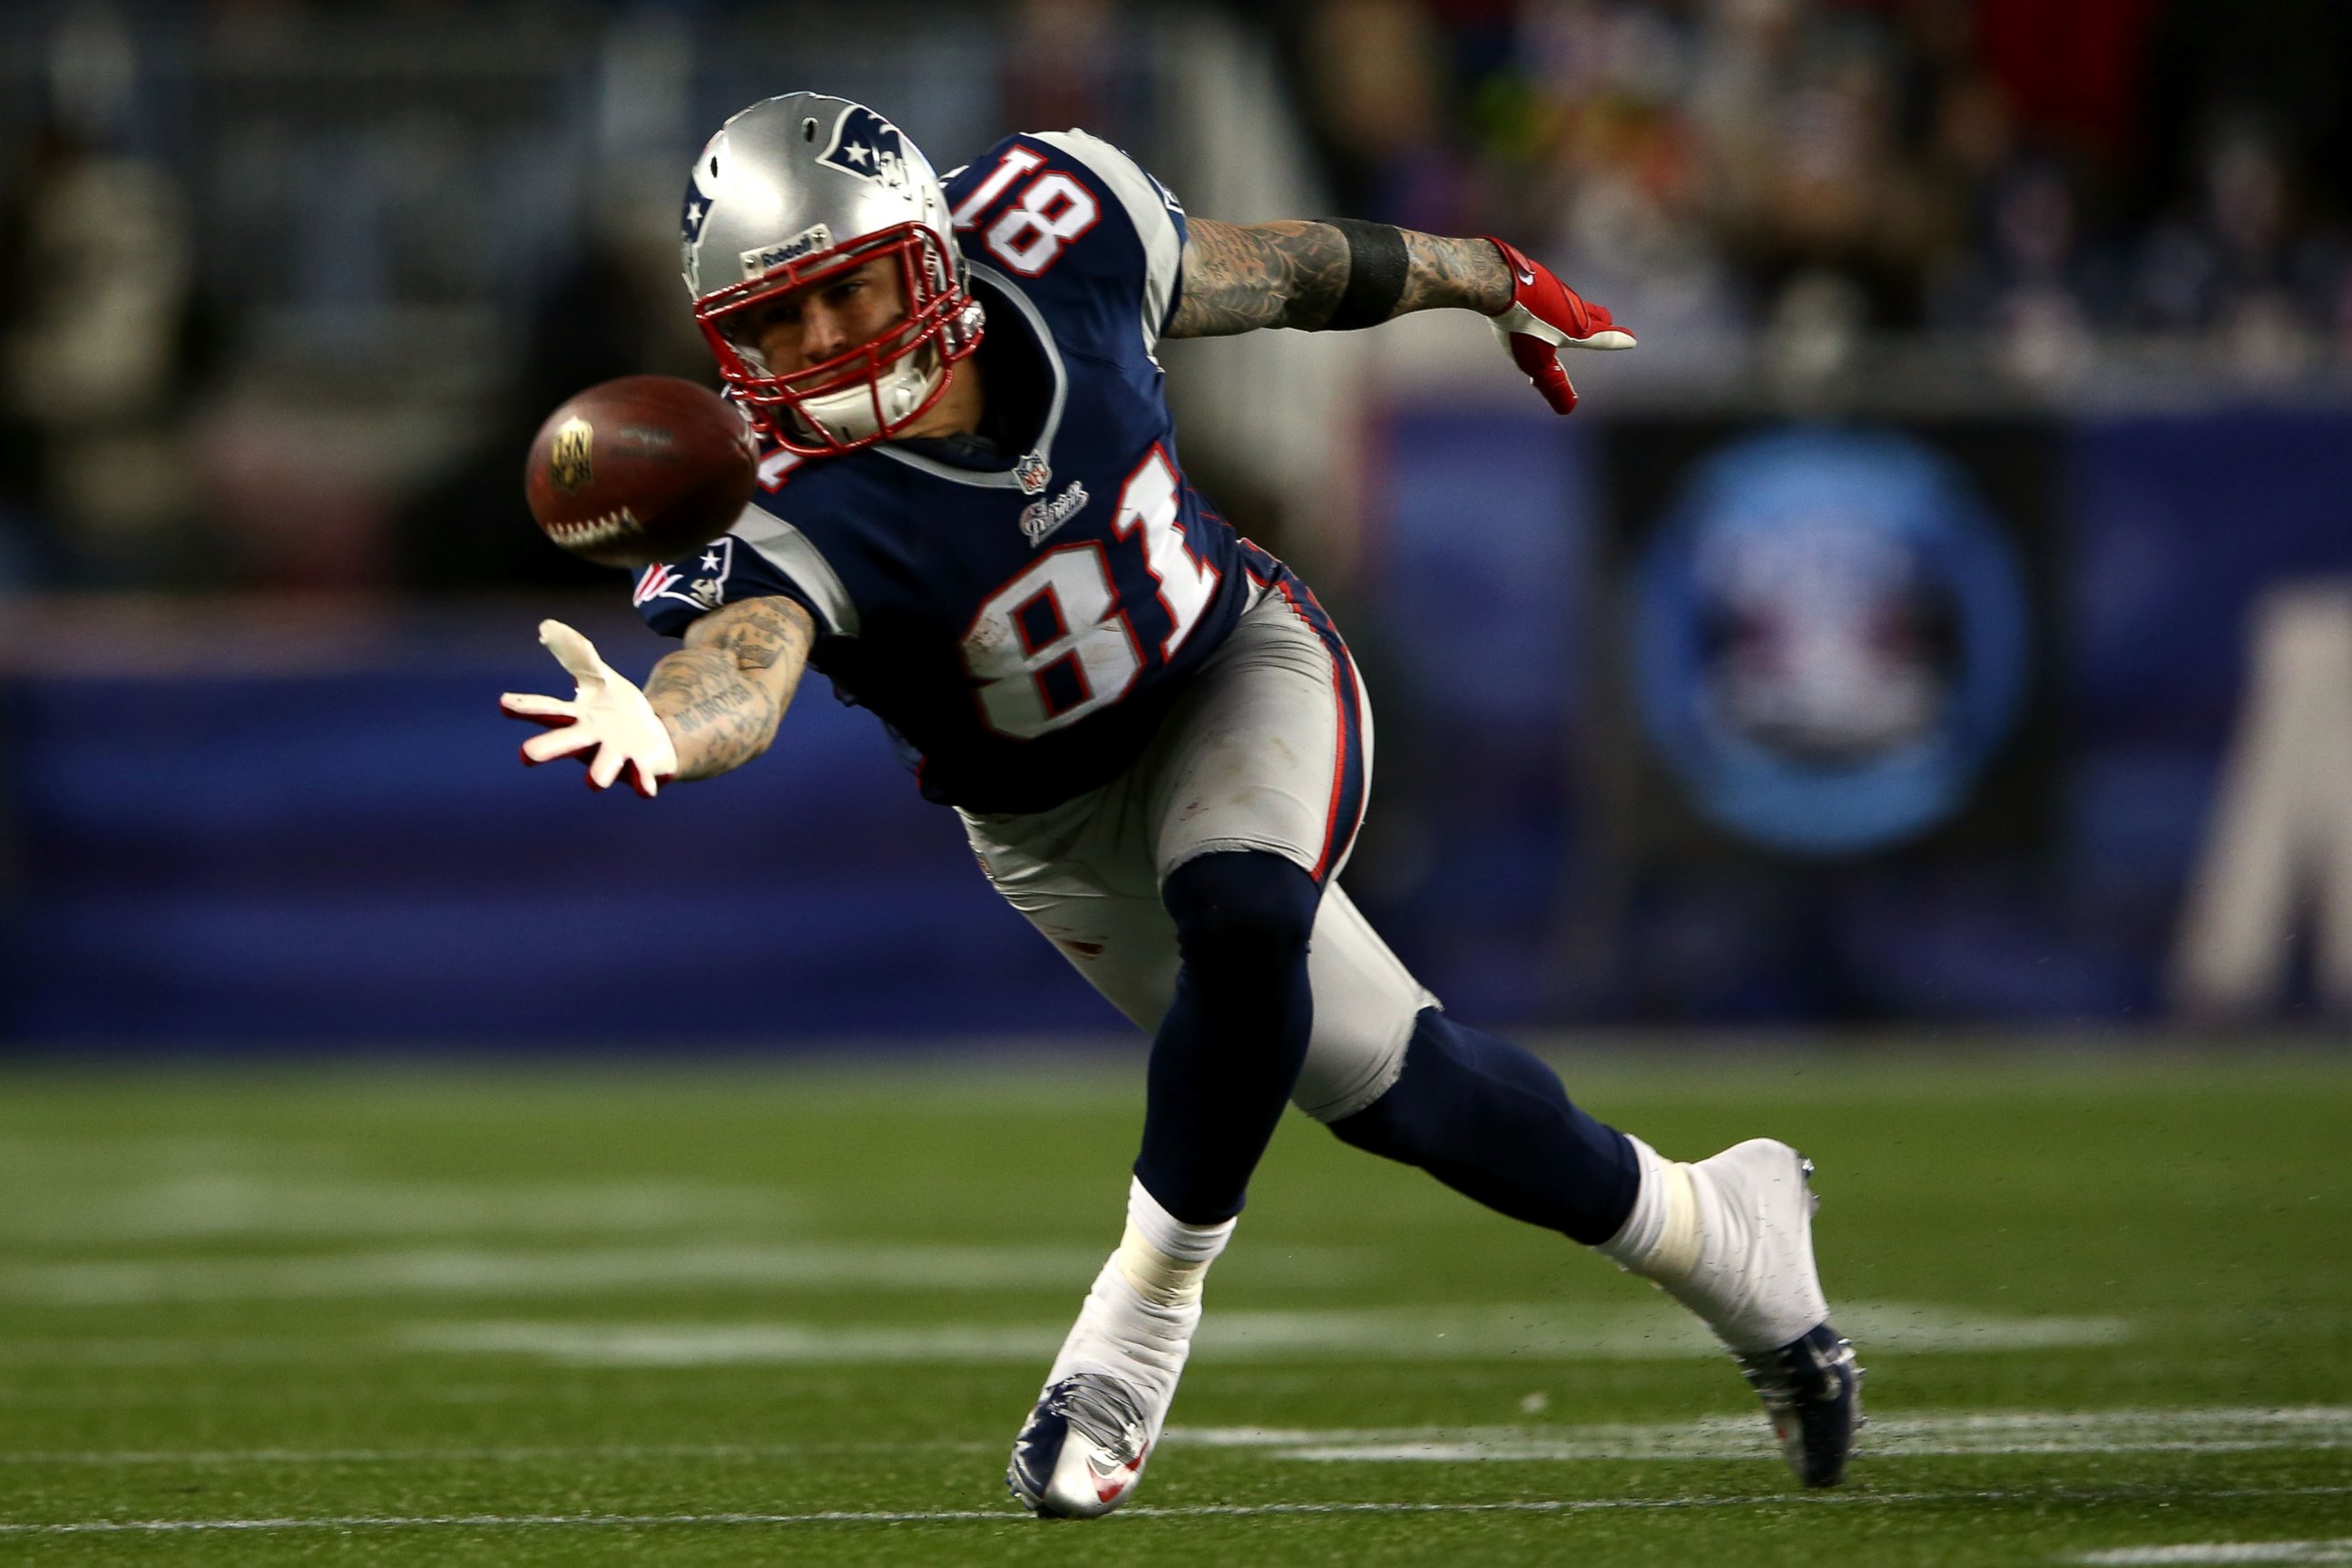 PHOTO: Aaron Hernandez of the New England Patriots misses a catch against the Baltimore Ravens during the 2013 AFC Championship game at Gillette Stadium, on Jan. 20, 2013, in Foxboro, Mass. 